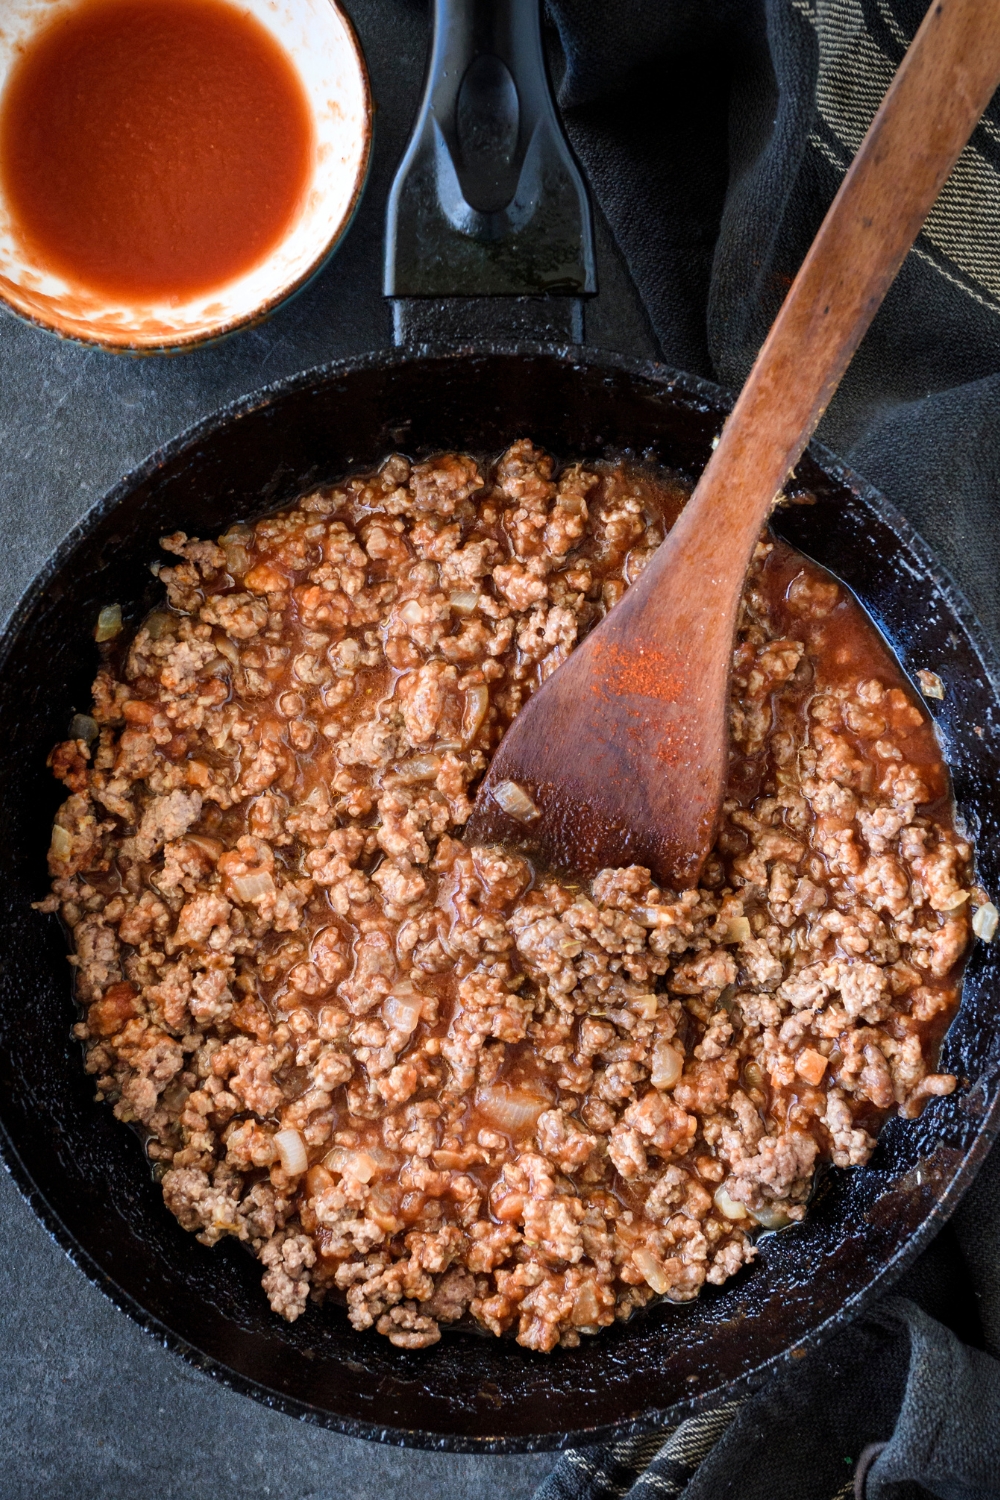 A skillet filled with cooked ground beef in tomato sauce. There is a wooden spoon in the skillet.